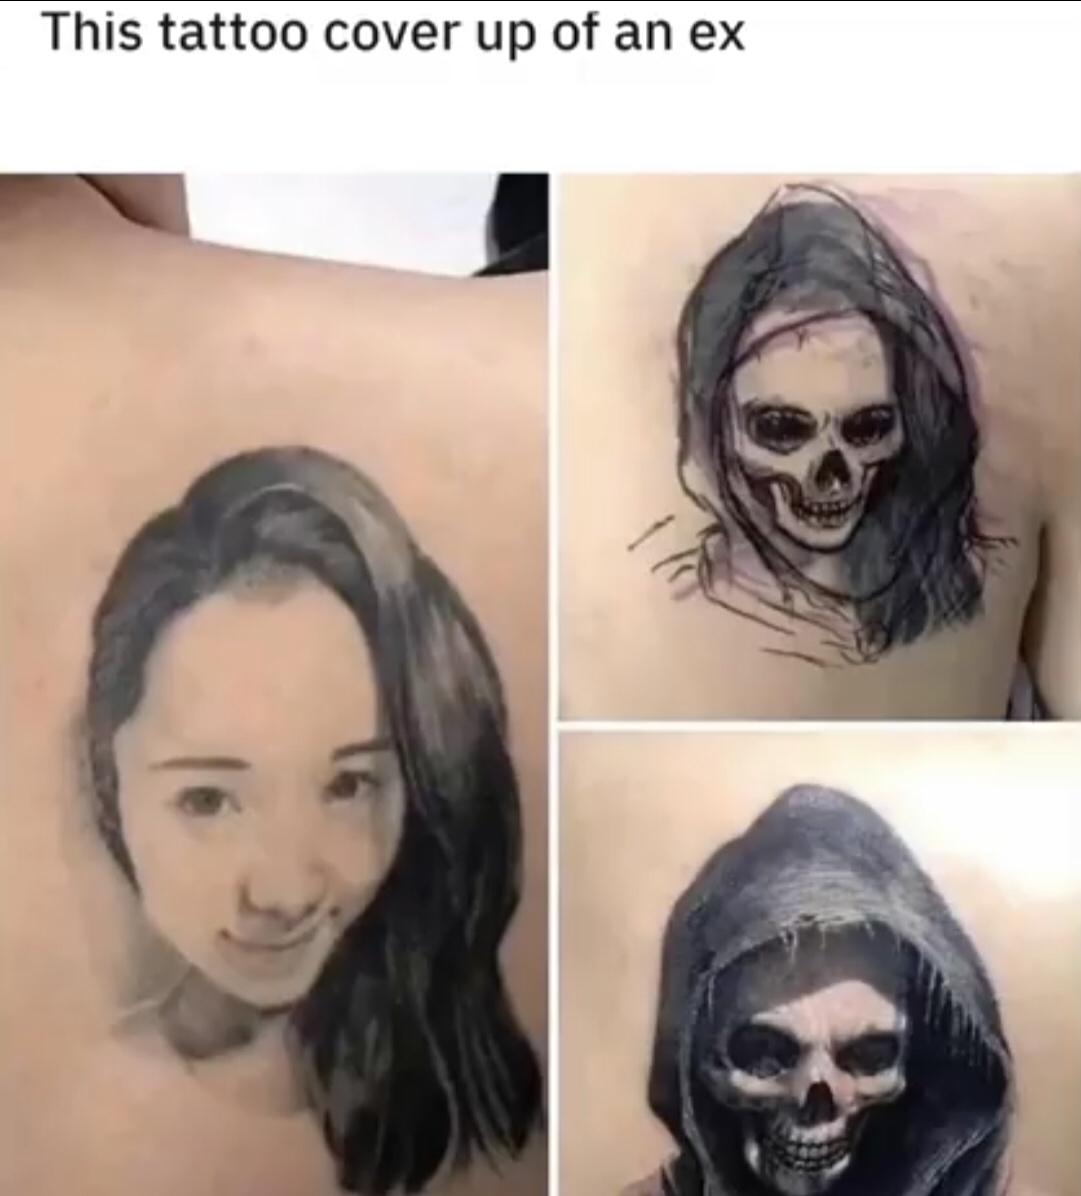 9gag tattoo cover up - This tattoo cover up of an ex